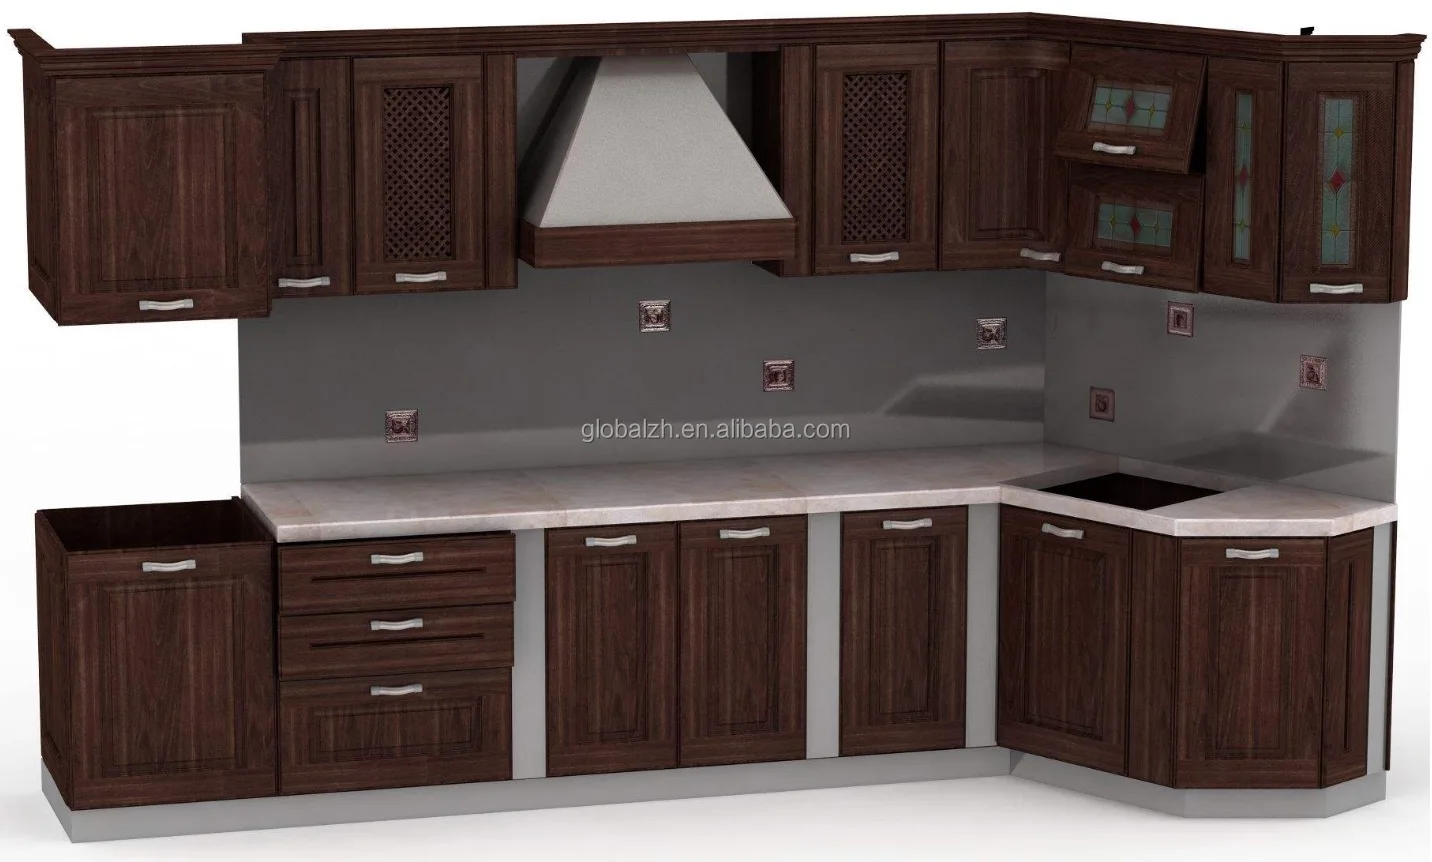 Alibaba Supplier Wholesales Flat Pack Pvc Vinyl Wrap Kitchen Cabinets Buy High Quality Alibaba Kitchen Cabinets Wholesales Flat Pack Kitchen Cabinets Alibaba Supplier Kitchen Cabinets Product On Alibaba Com